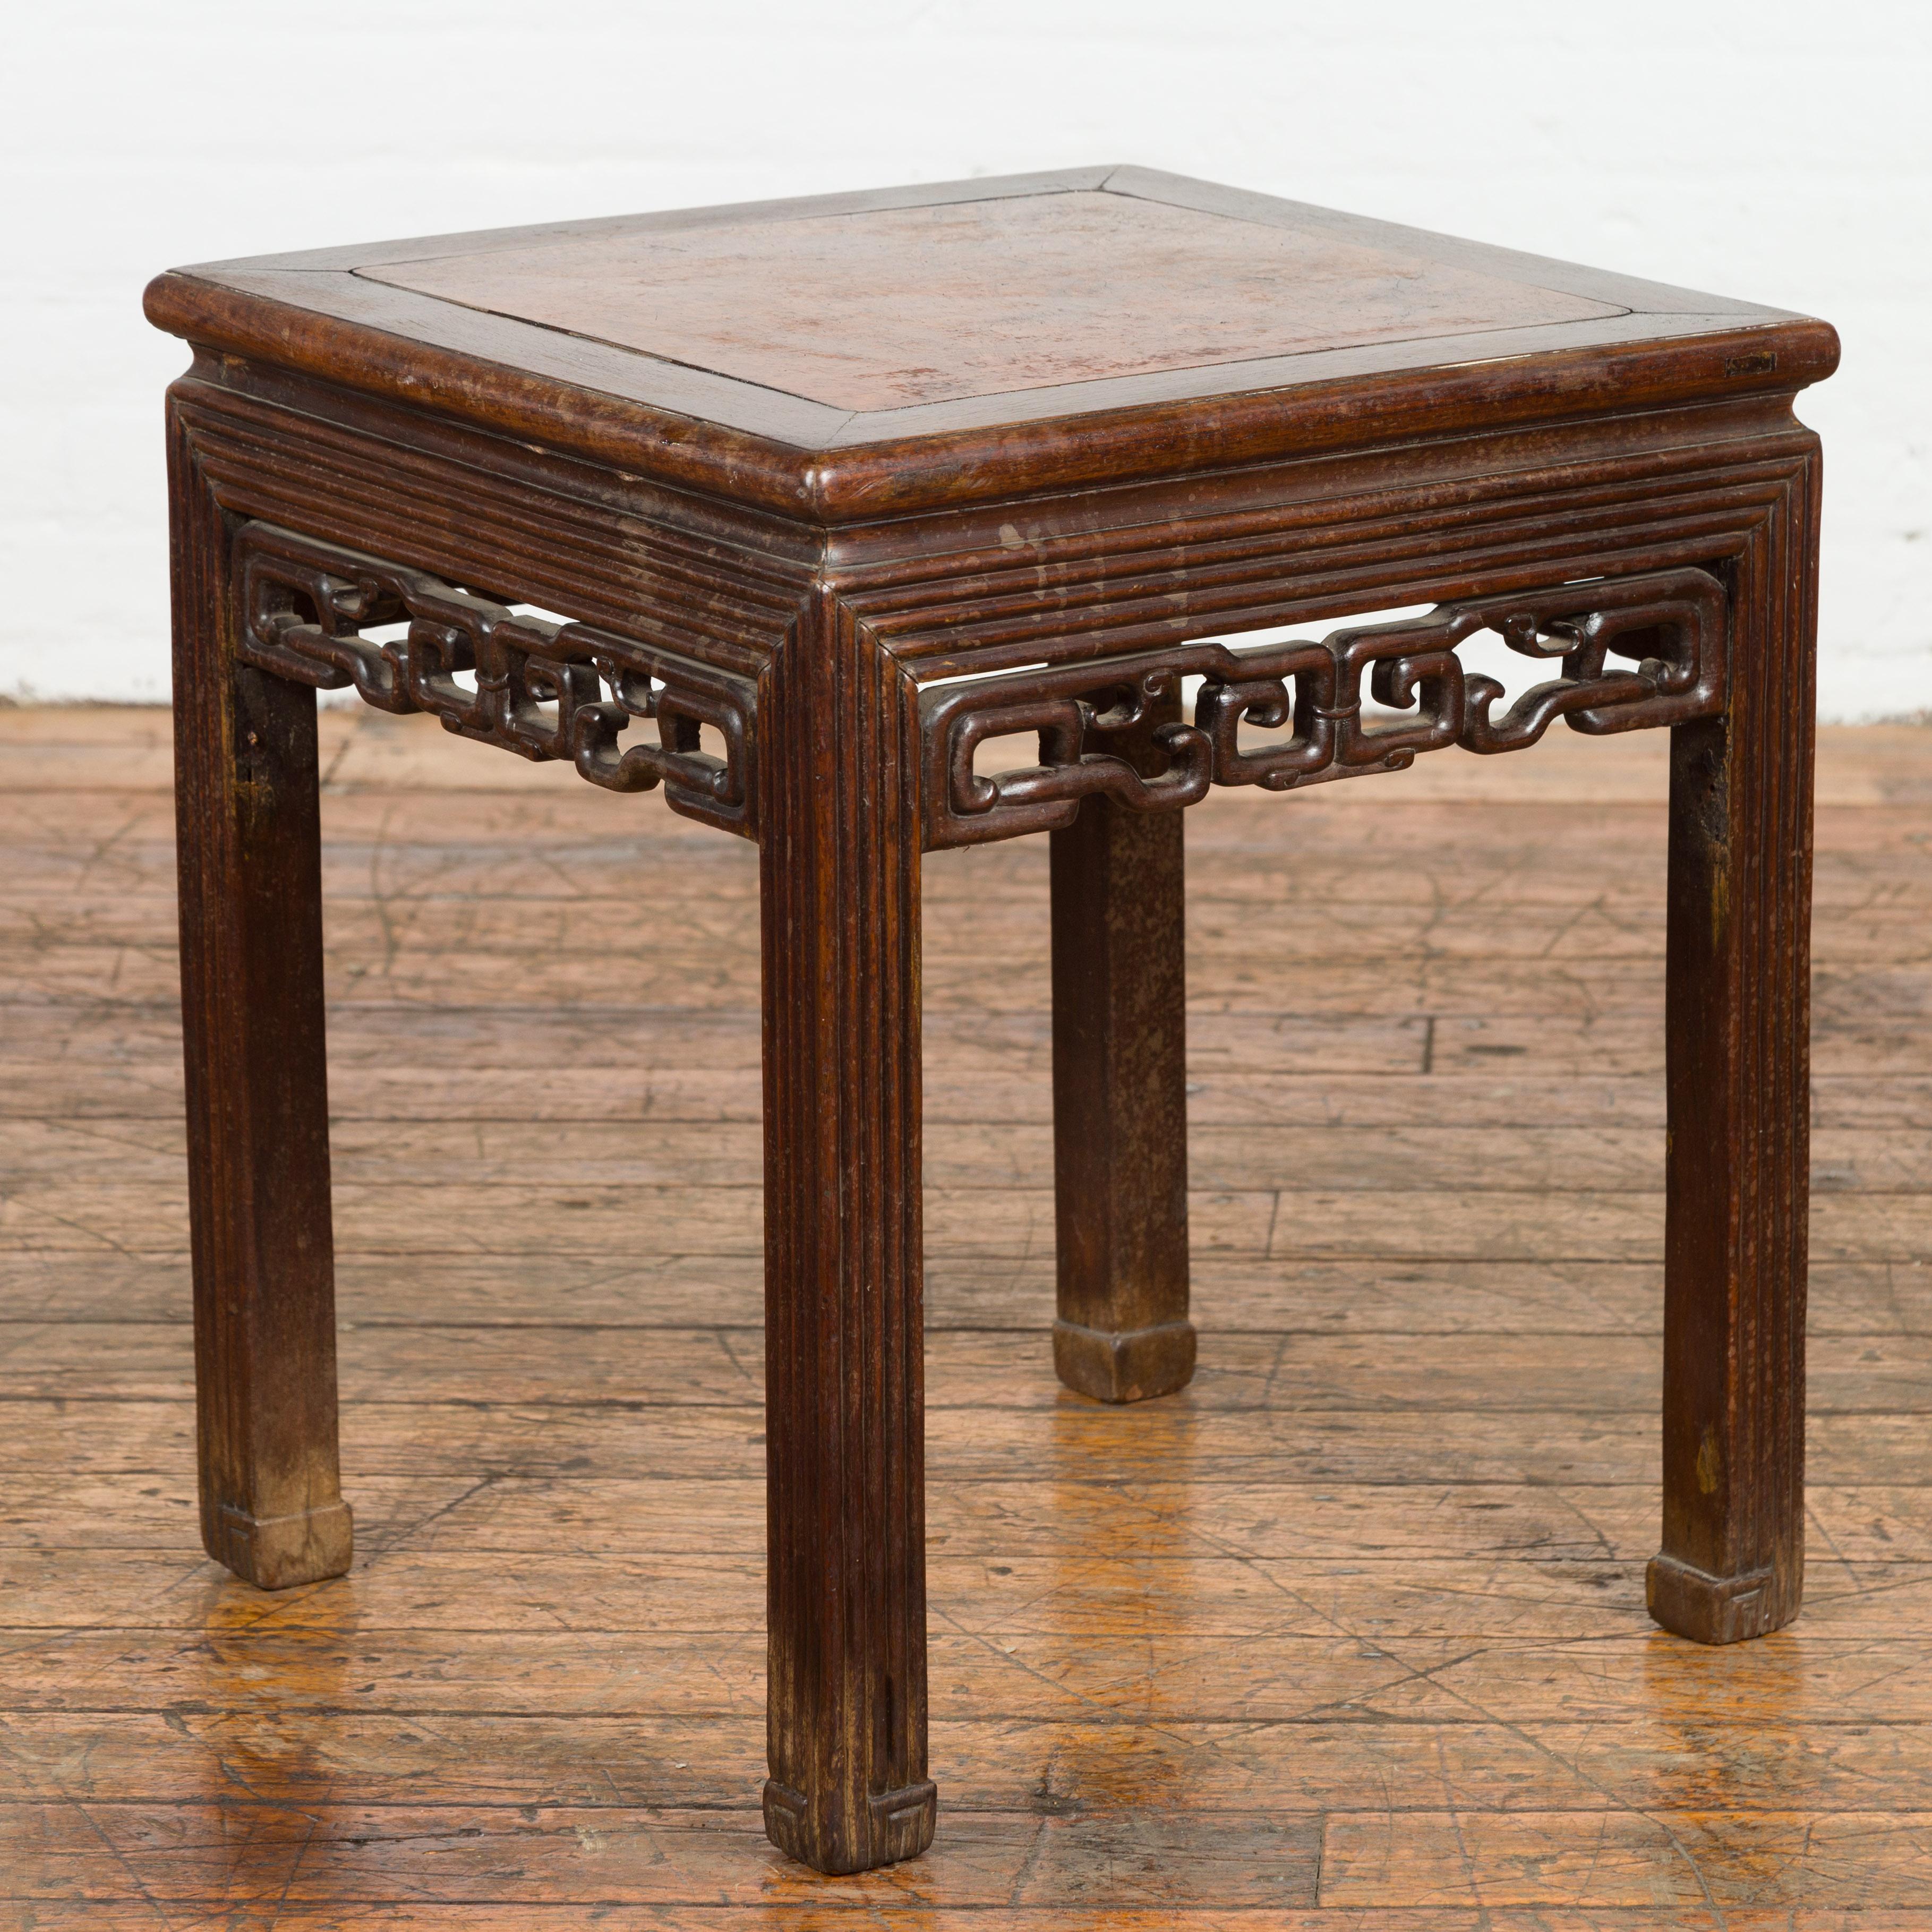 A Chinese Qing Dynasty period side table from the 19th century with inset burl top, carved reeded base and fretwork motifs on the apron. Behold a piece from the esteemed Qing Dynasty period – this Chinese side table is a harmonious symphony of